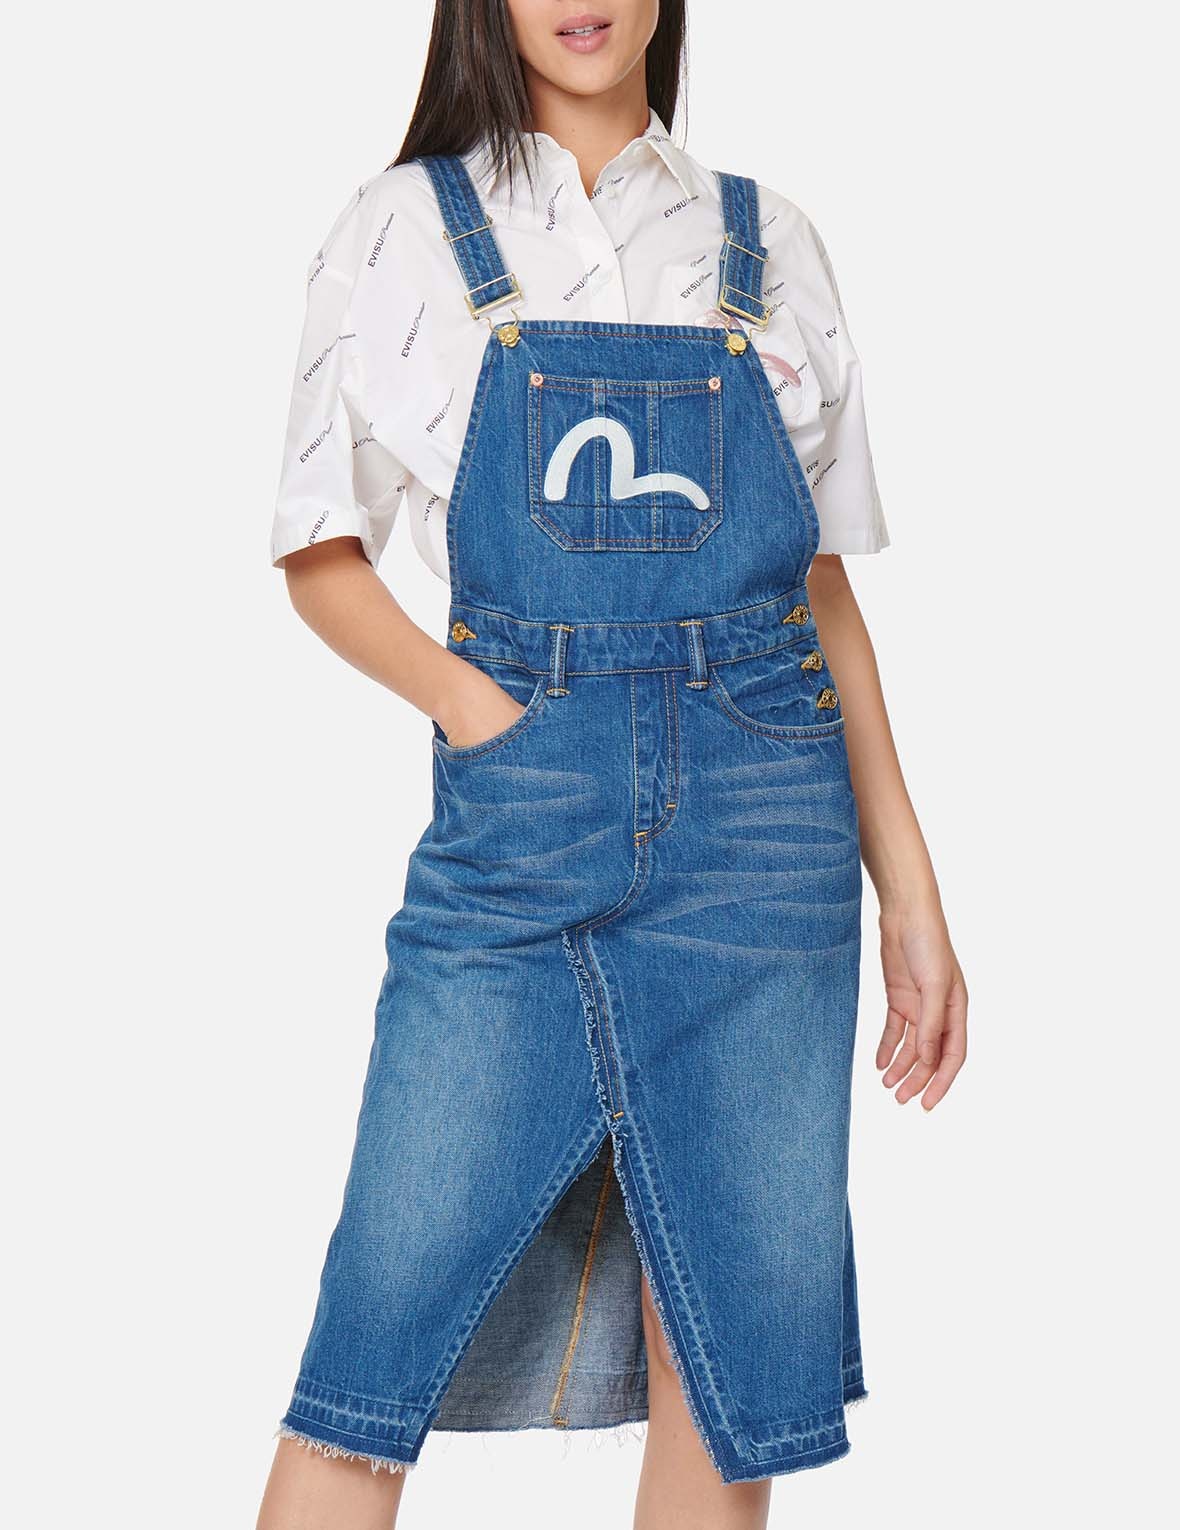 SEAGULL EMBROIDERED DENIM DUNGAREE DRESS - 3